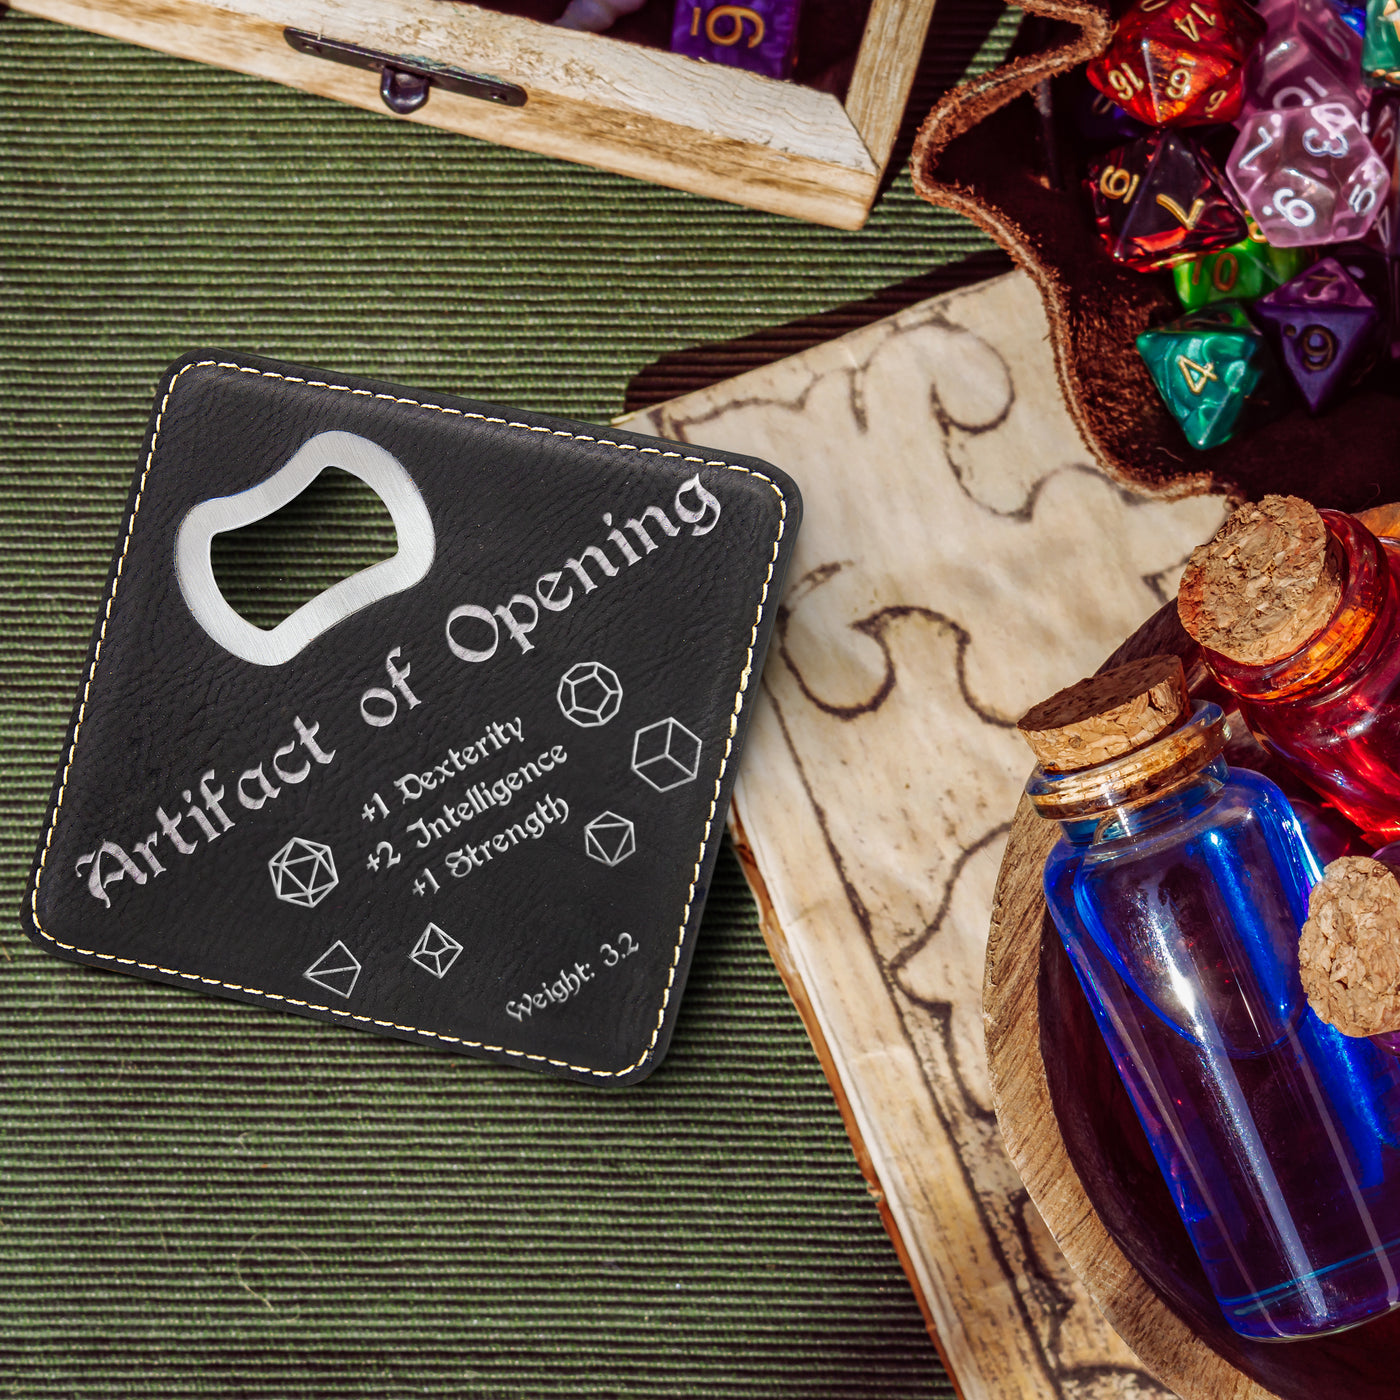 Dungeons and Dragons Artifact of Opening DnD Coaster Bottle Opener | DnD Gift for Men | Dungeon Master Gift | DnD Stuff | D&D Gifts